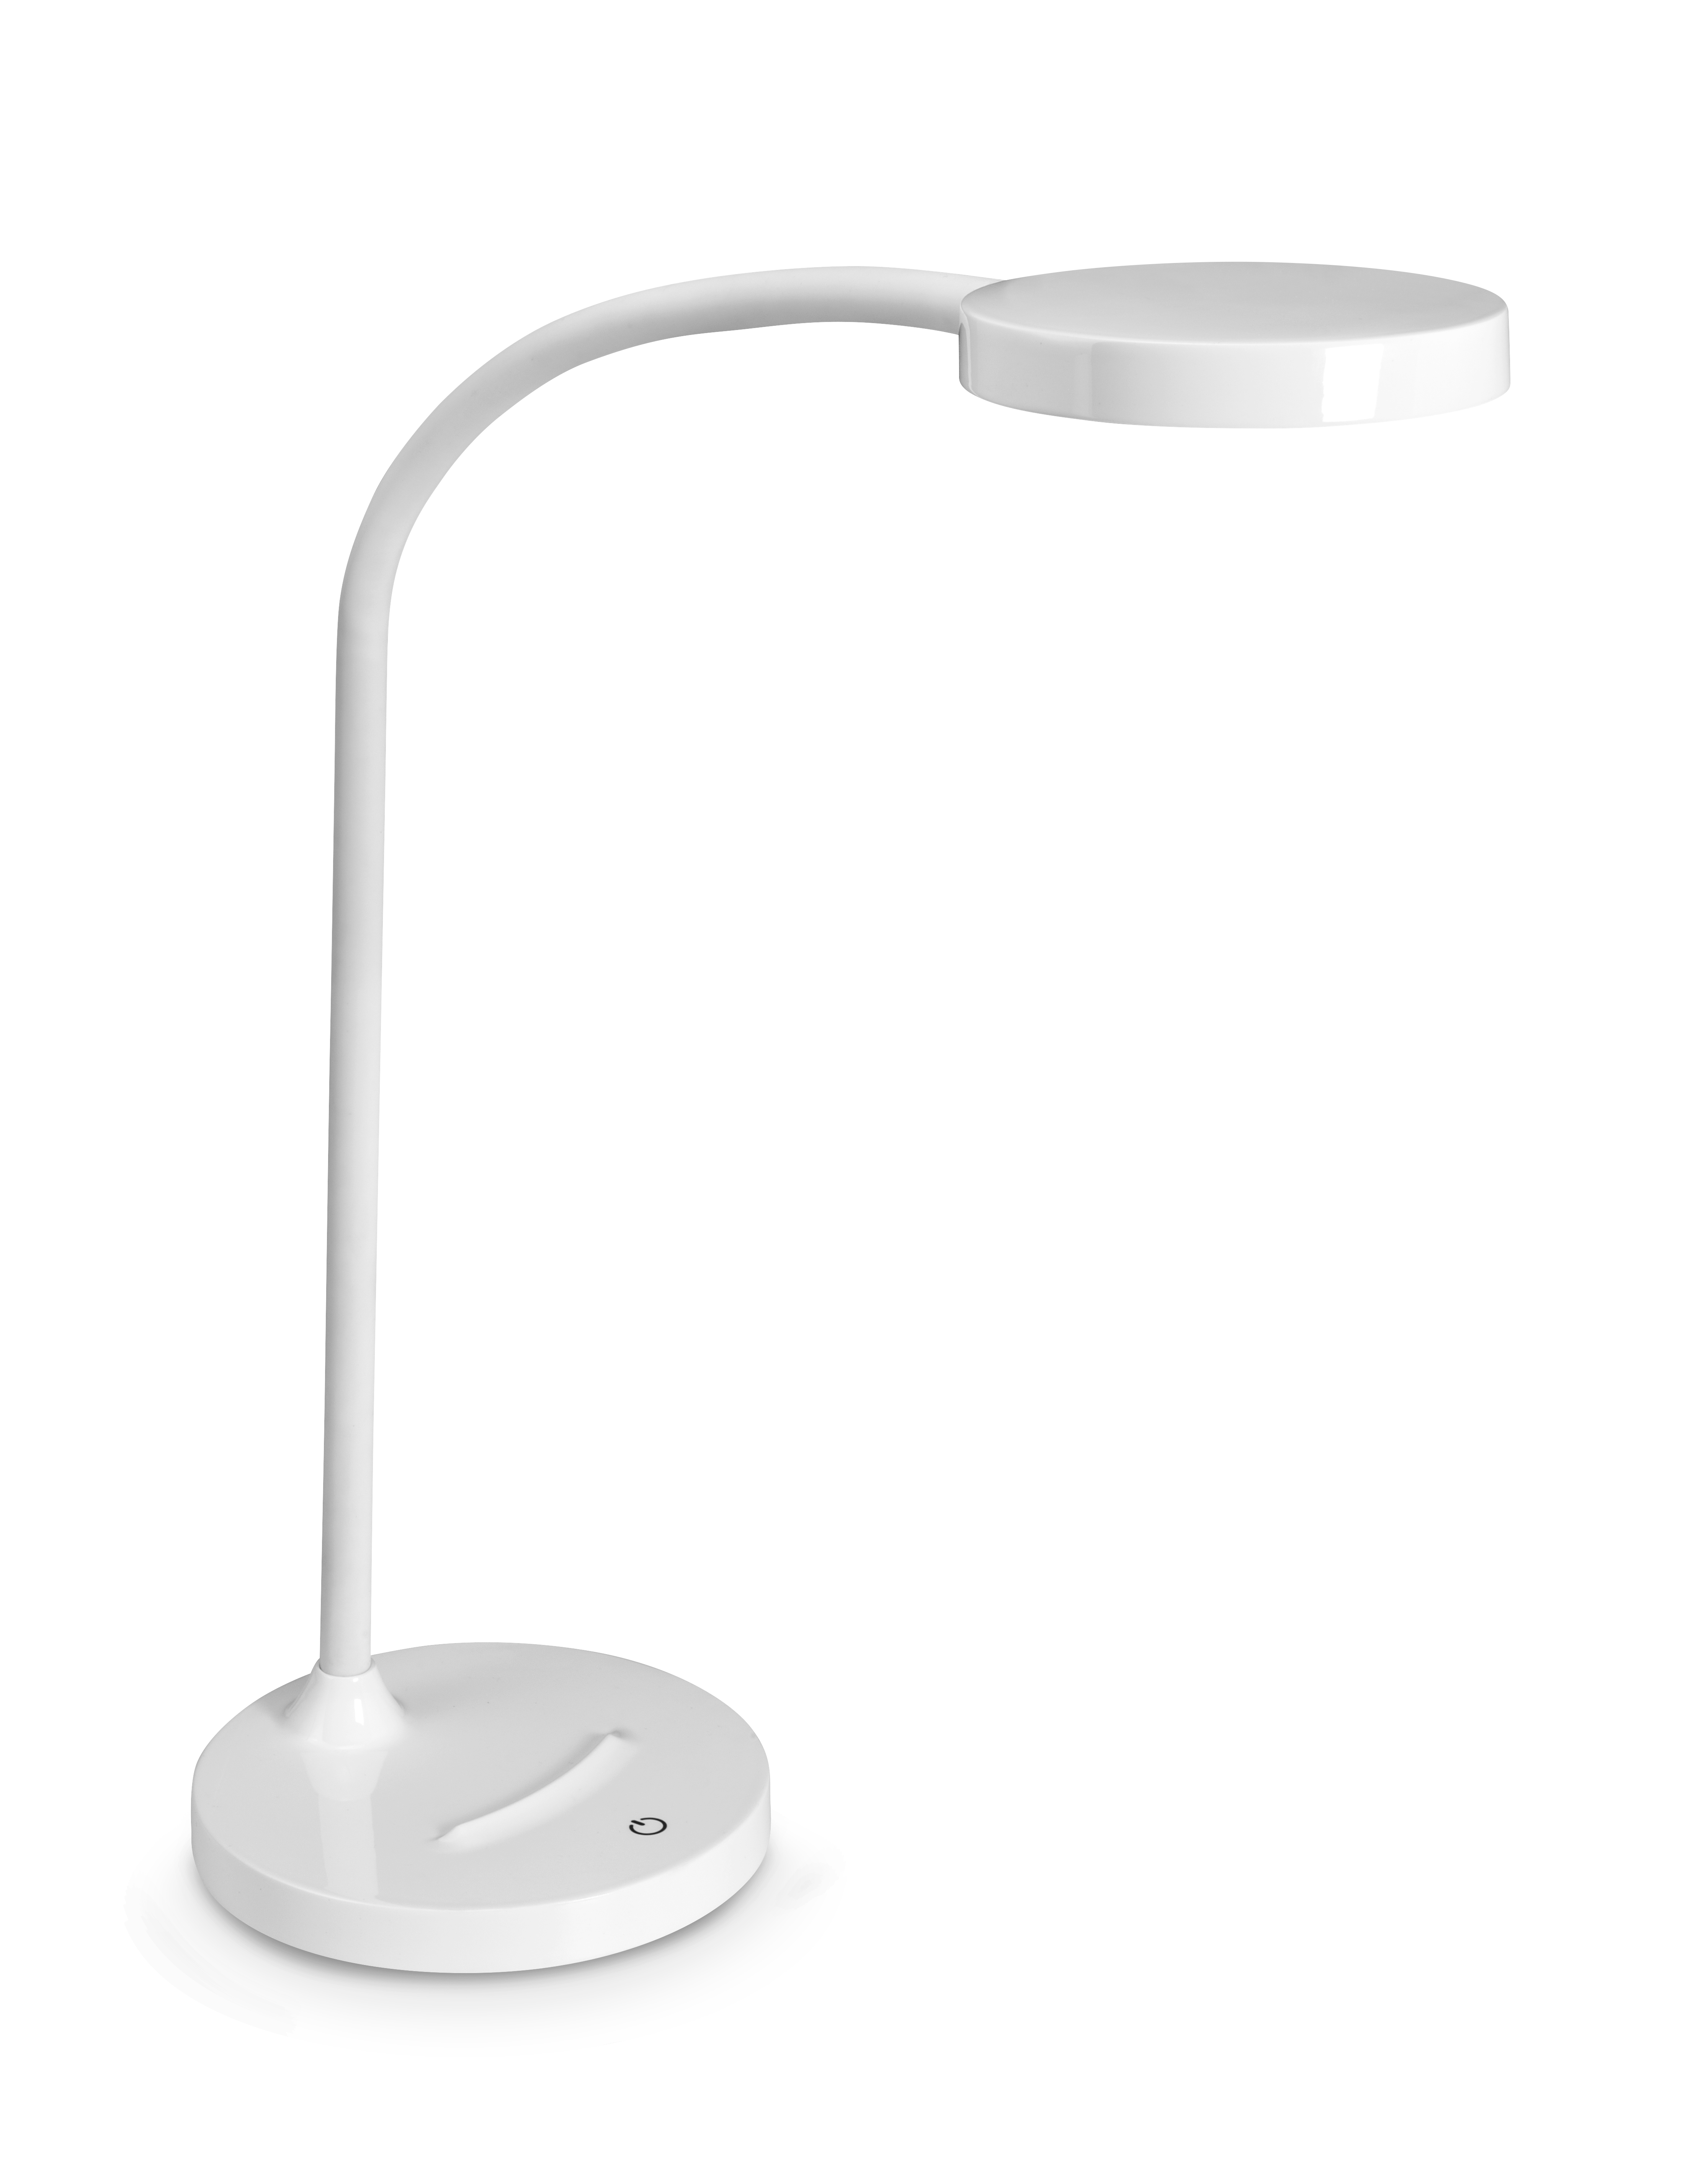 CEP Lampe de table FLEX CLED-0290wei blanc, dimmable 7W